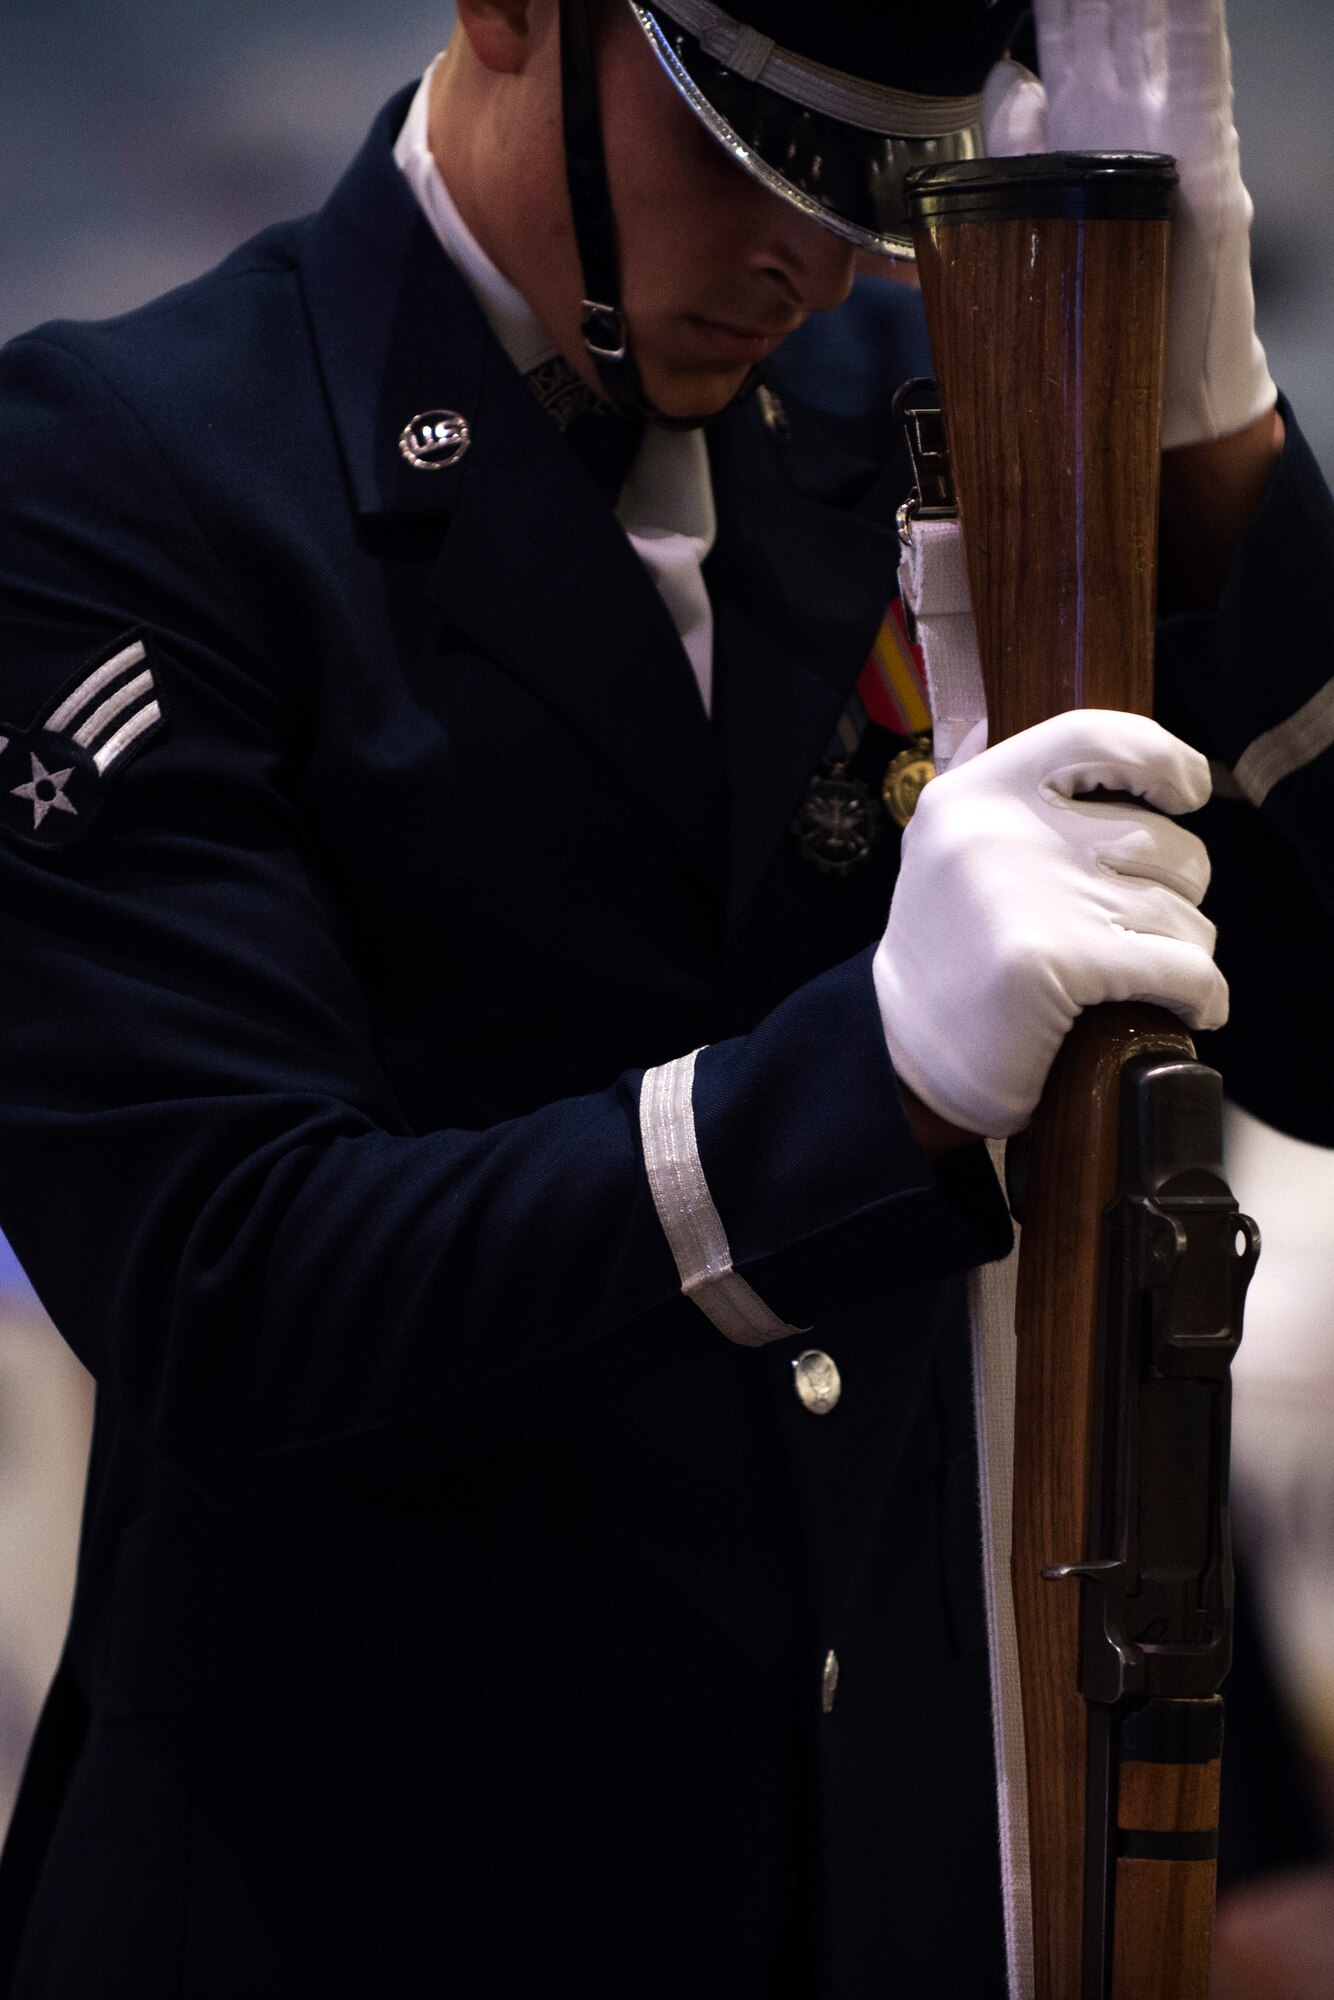 Senior Airman Angelo Hightower, U.S. Air Force Honor Guard Drill Team member, performs a rifle maneuver at the Live on Green event in Pasadena, Calif., Dec. 31, 2016. The Live on Green event is held annually as a celebration leading up to the Rose Parade and Rose Bowl Game. (U.S. Air Force photo by Senior Airman Philip Bryant)